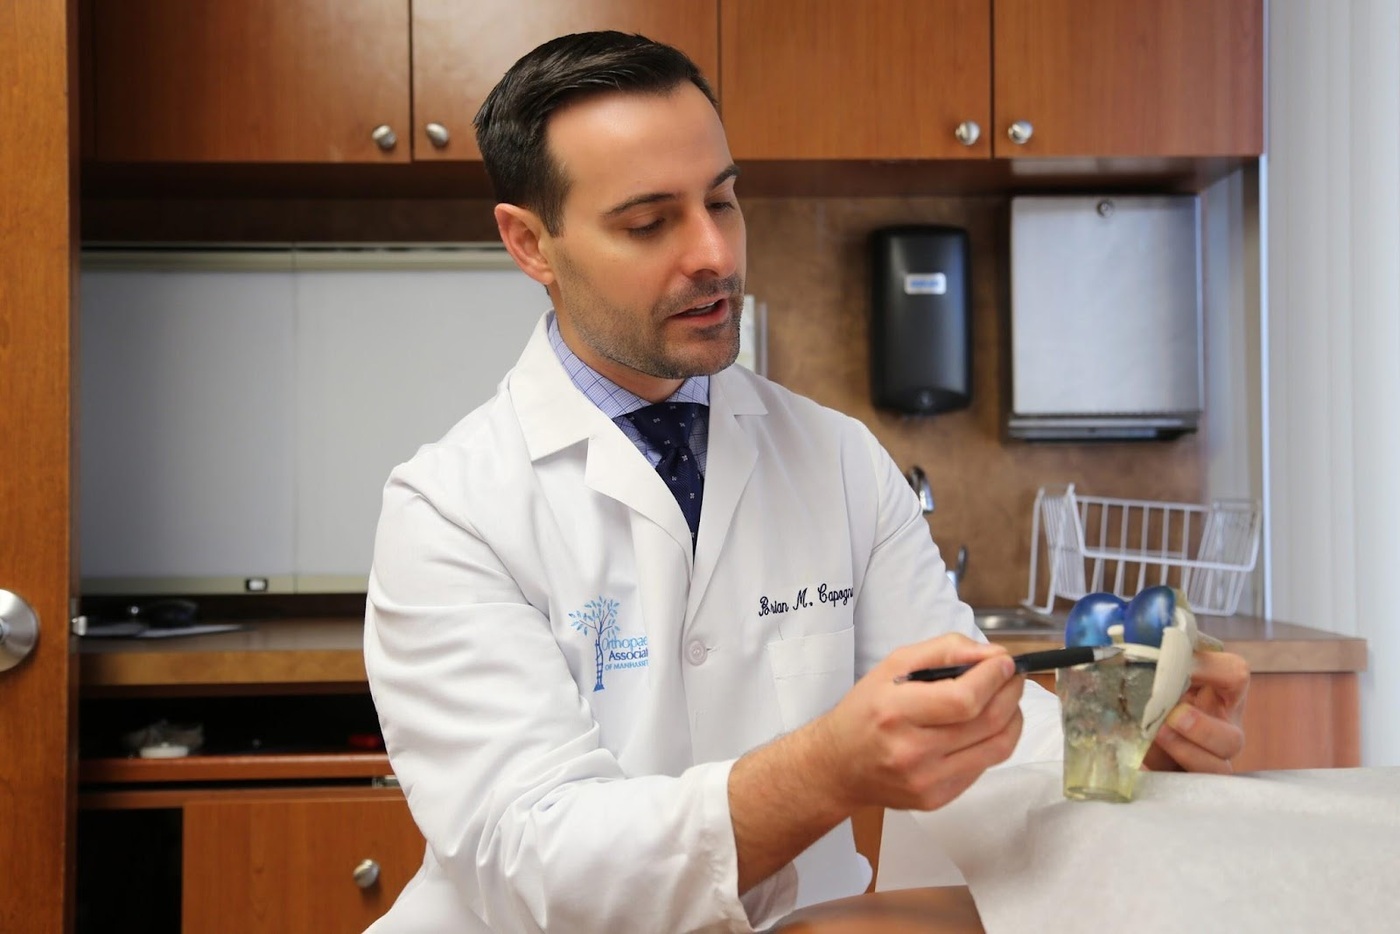 Brian Capogna, MD specializes in shoulder, elbow, hip, and knee injuries.